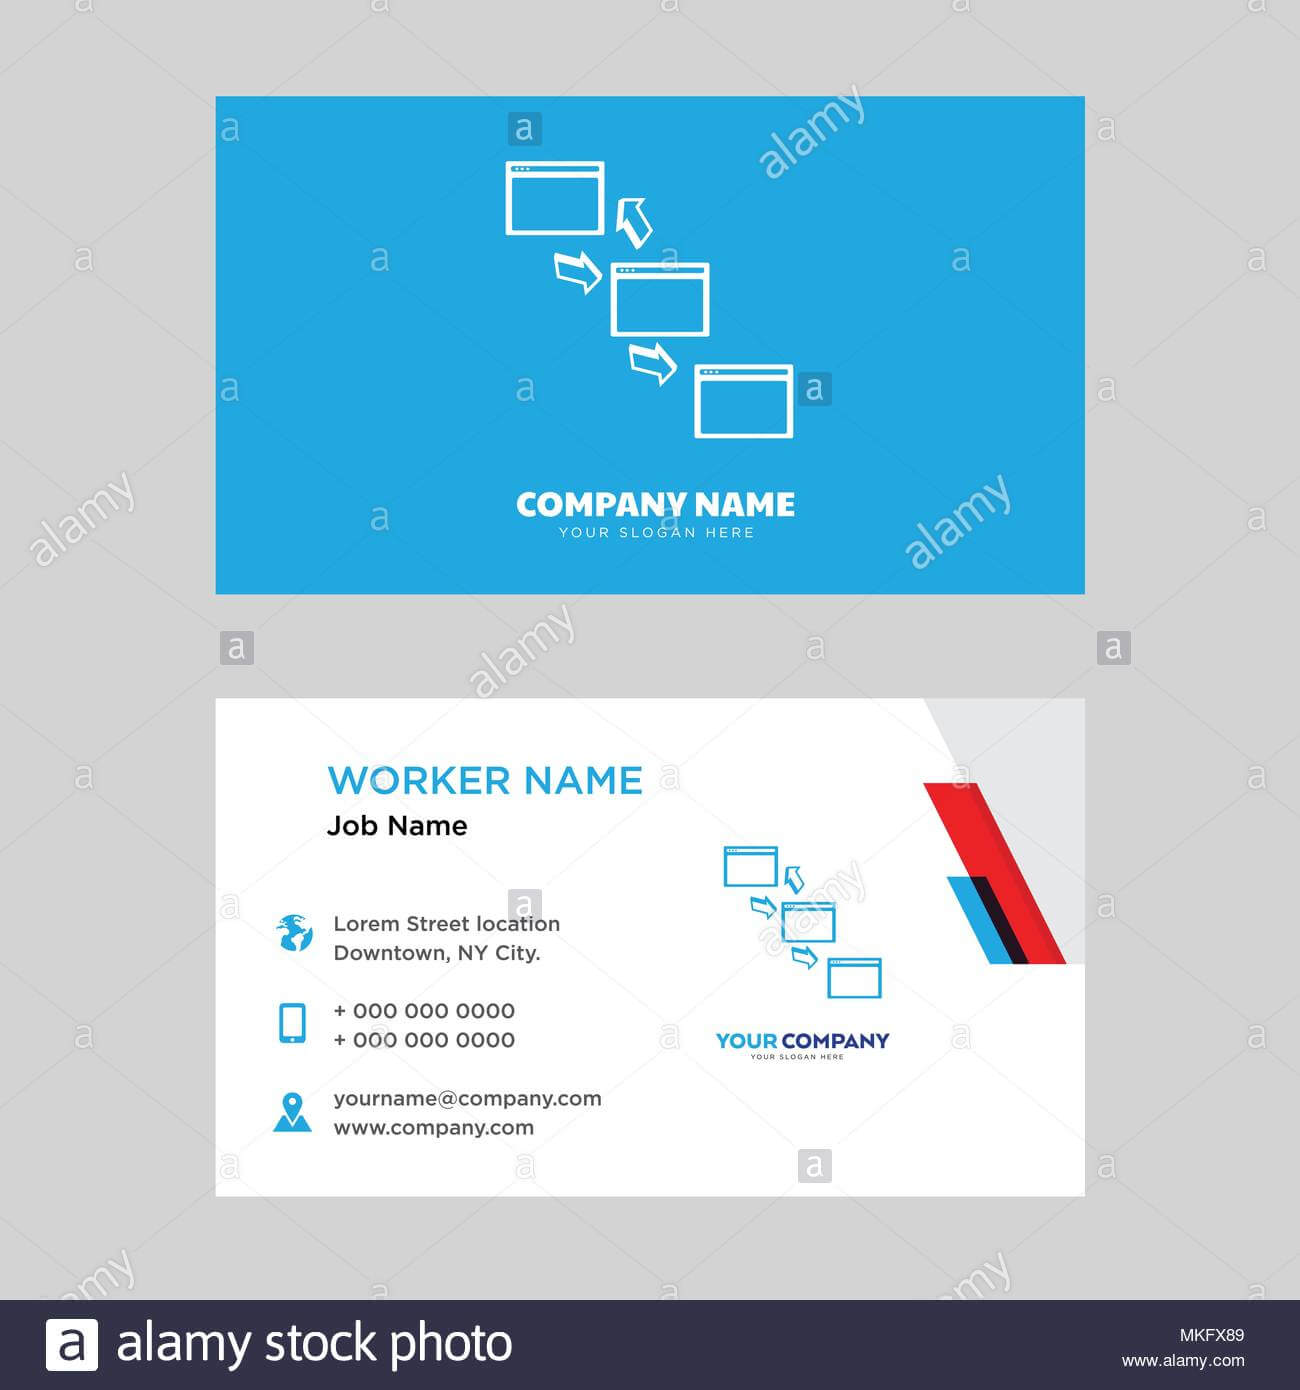 Networking Business Card Design Template, Visiting For Your In Networking Card Template